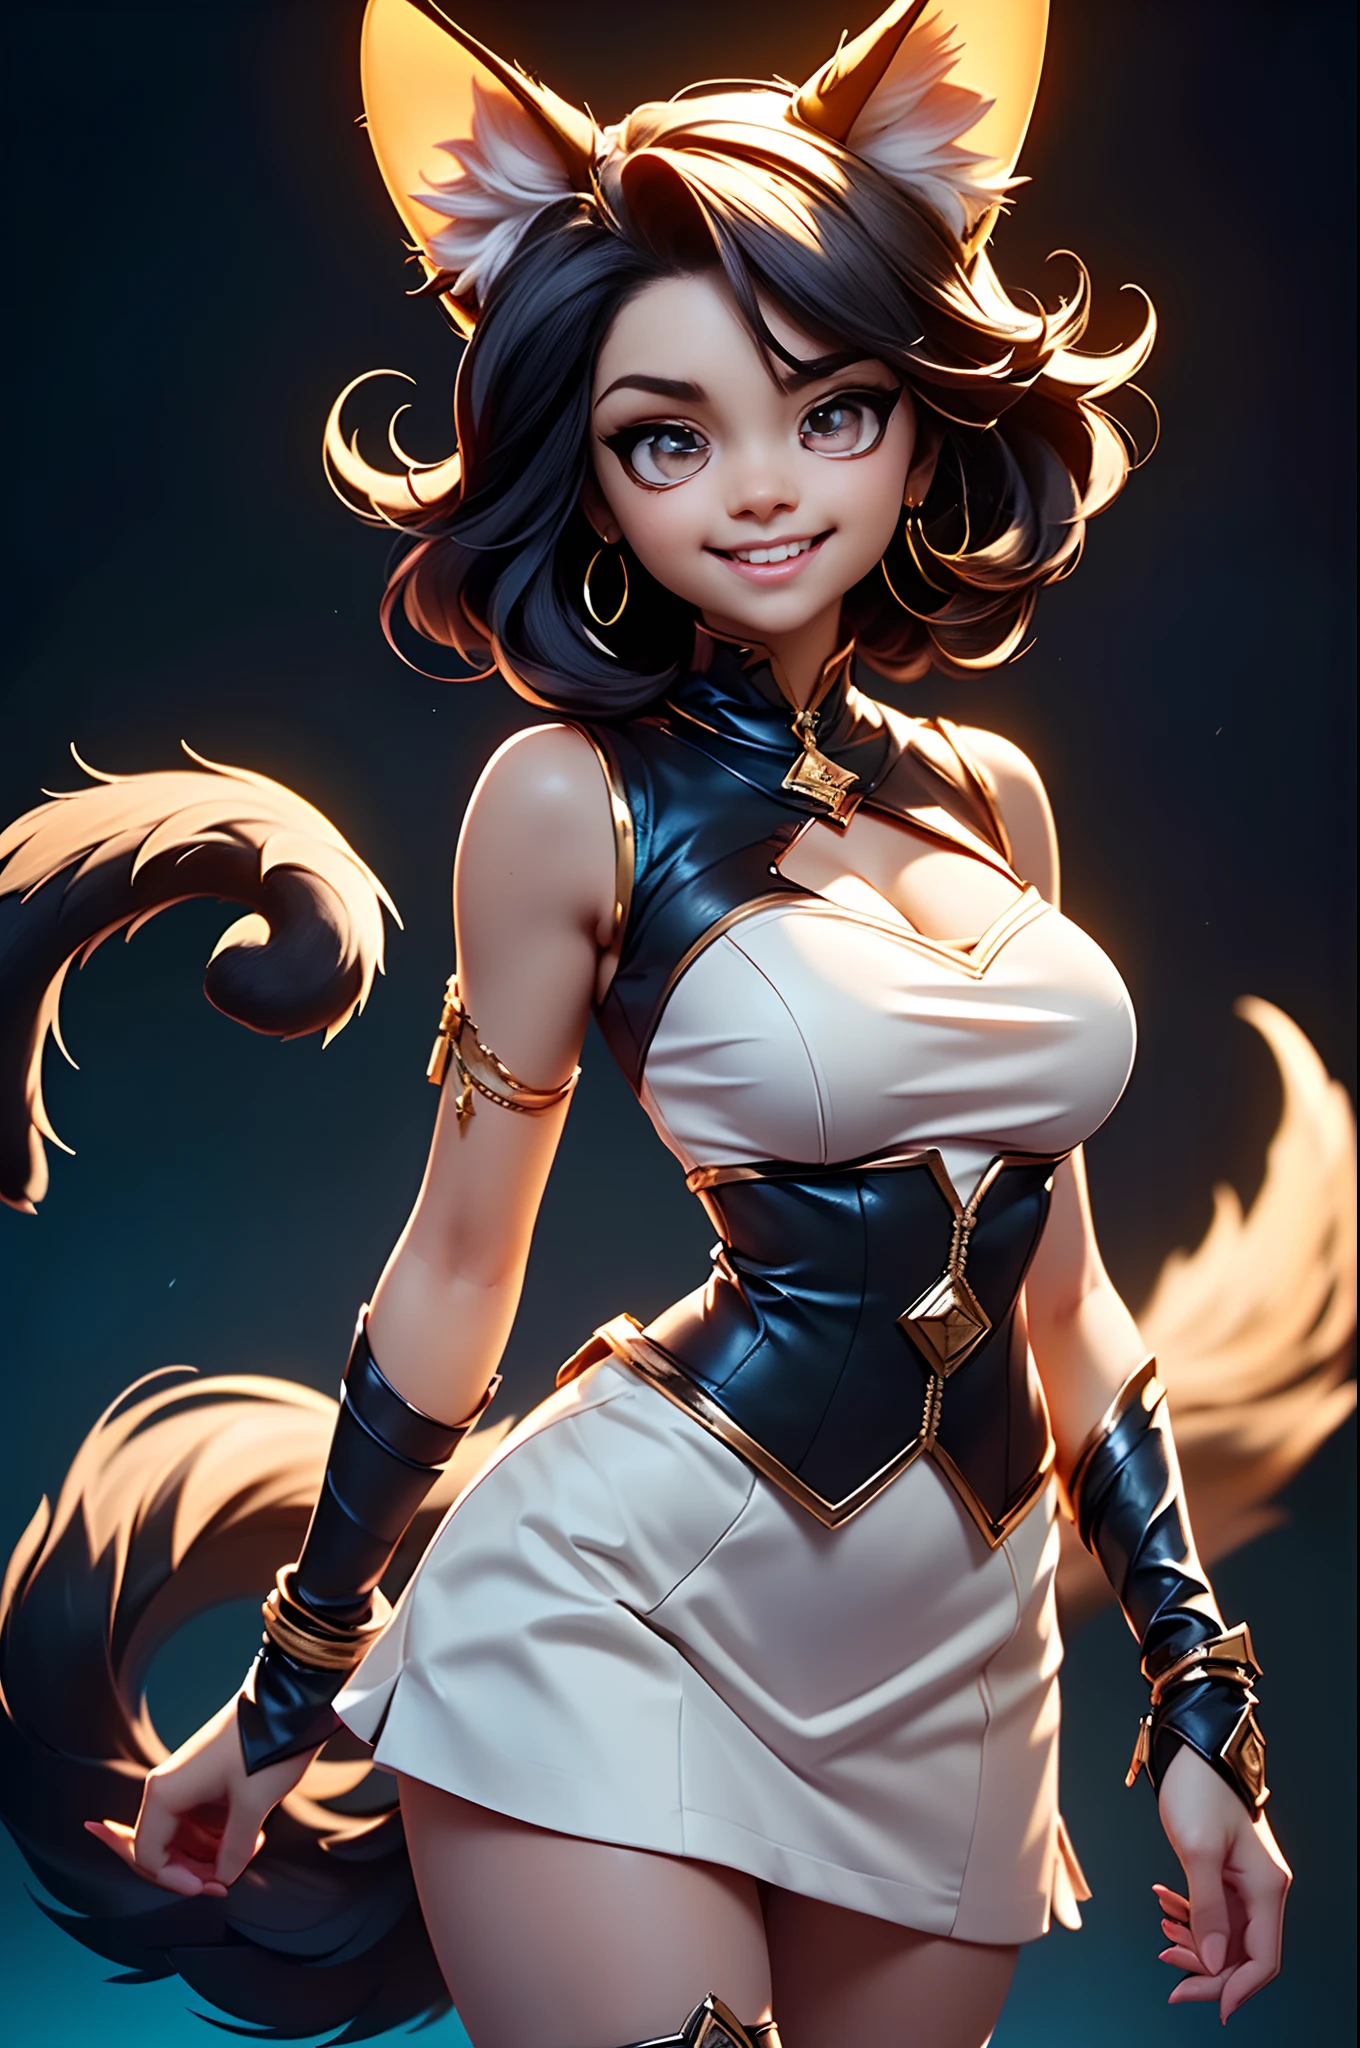 (Beautiful woman face:1.5), (Cute image standing all over the body:1.5), (Cat-like furry body and cat's paws:1.5), (The paw is on the chin:1.2), (Cute), ( anime styled 3d:1.5), pleatedskirt, White color blouse, (Hairy limbs:1.45), (Very long, Fluffy fox tail:1.45), (Extremely detailed CG Unity 16k wallpaper:1.3), Dynamic Angle, the golden ratio, (tmasterpiece:1.37), (Detailed:1.15), (view the viewer), Cinematic light, Side lighting, hdr, Perfect iris, (+Perfect hand+:1.21), Lifelike texture, （realisticlying：1.37）, (happy laughing:1.1), Ray tracing, hyper HD, (Best quality:1.13)